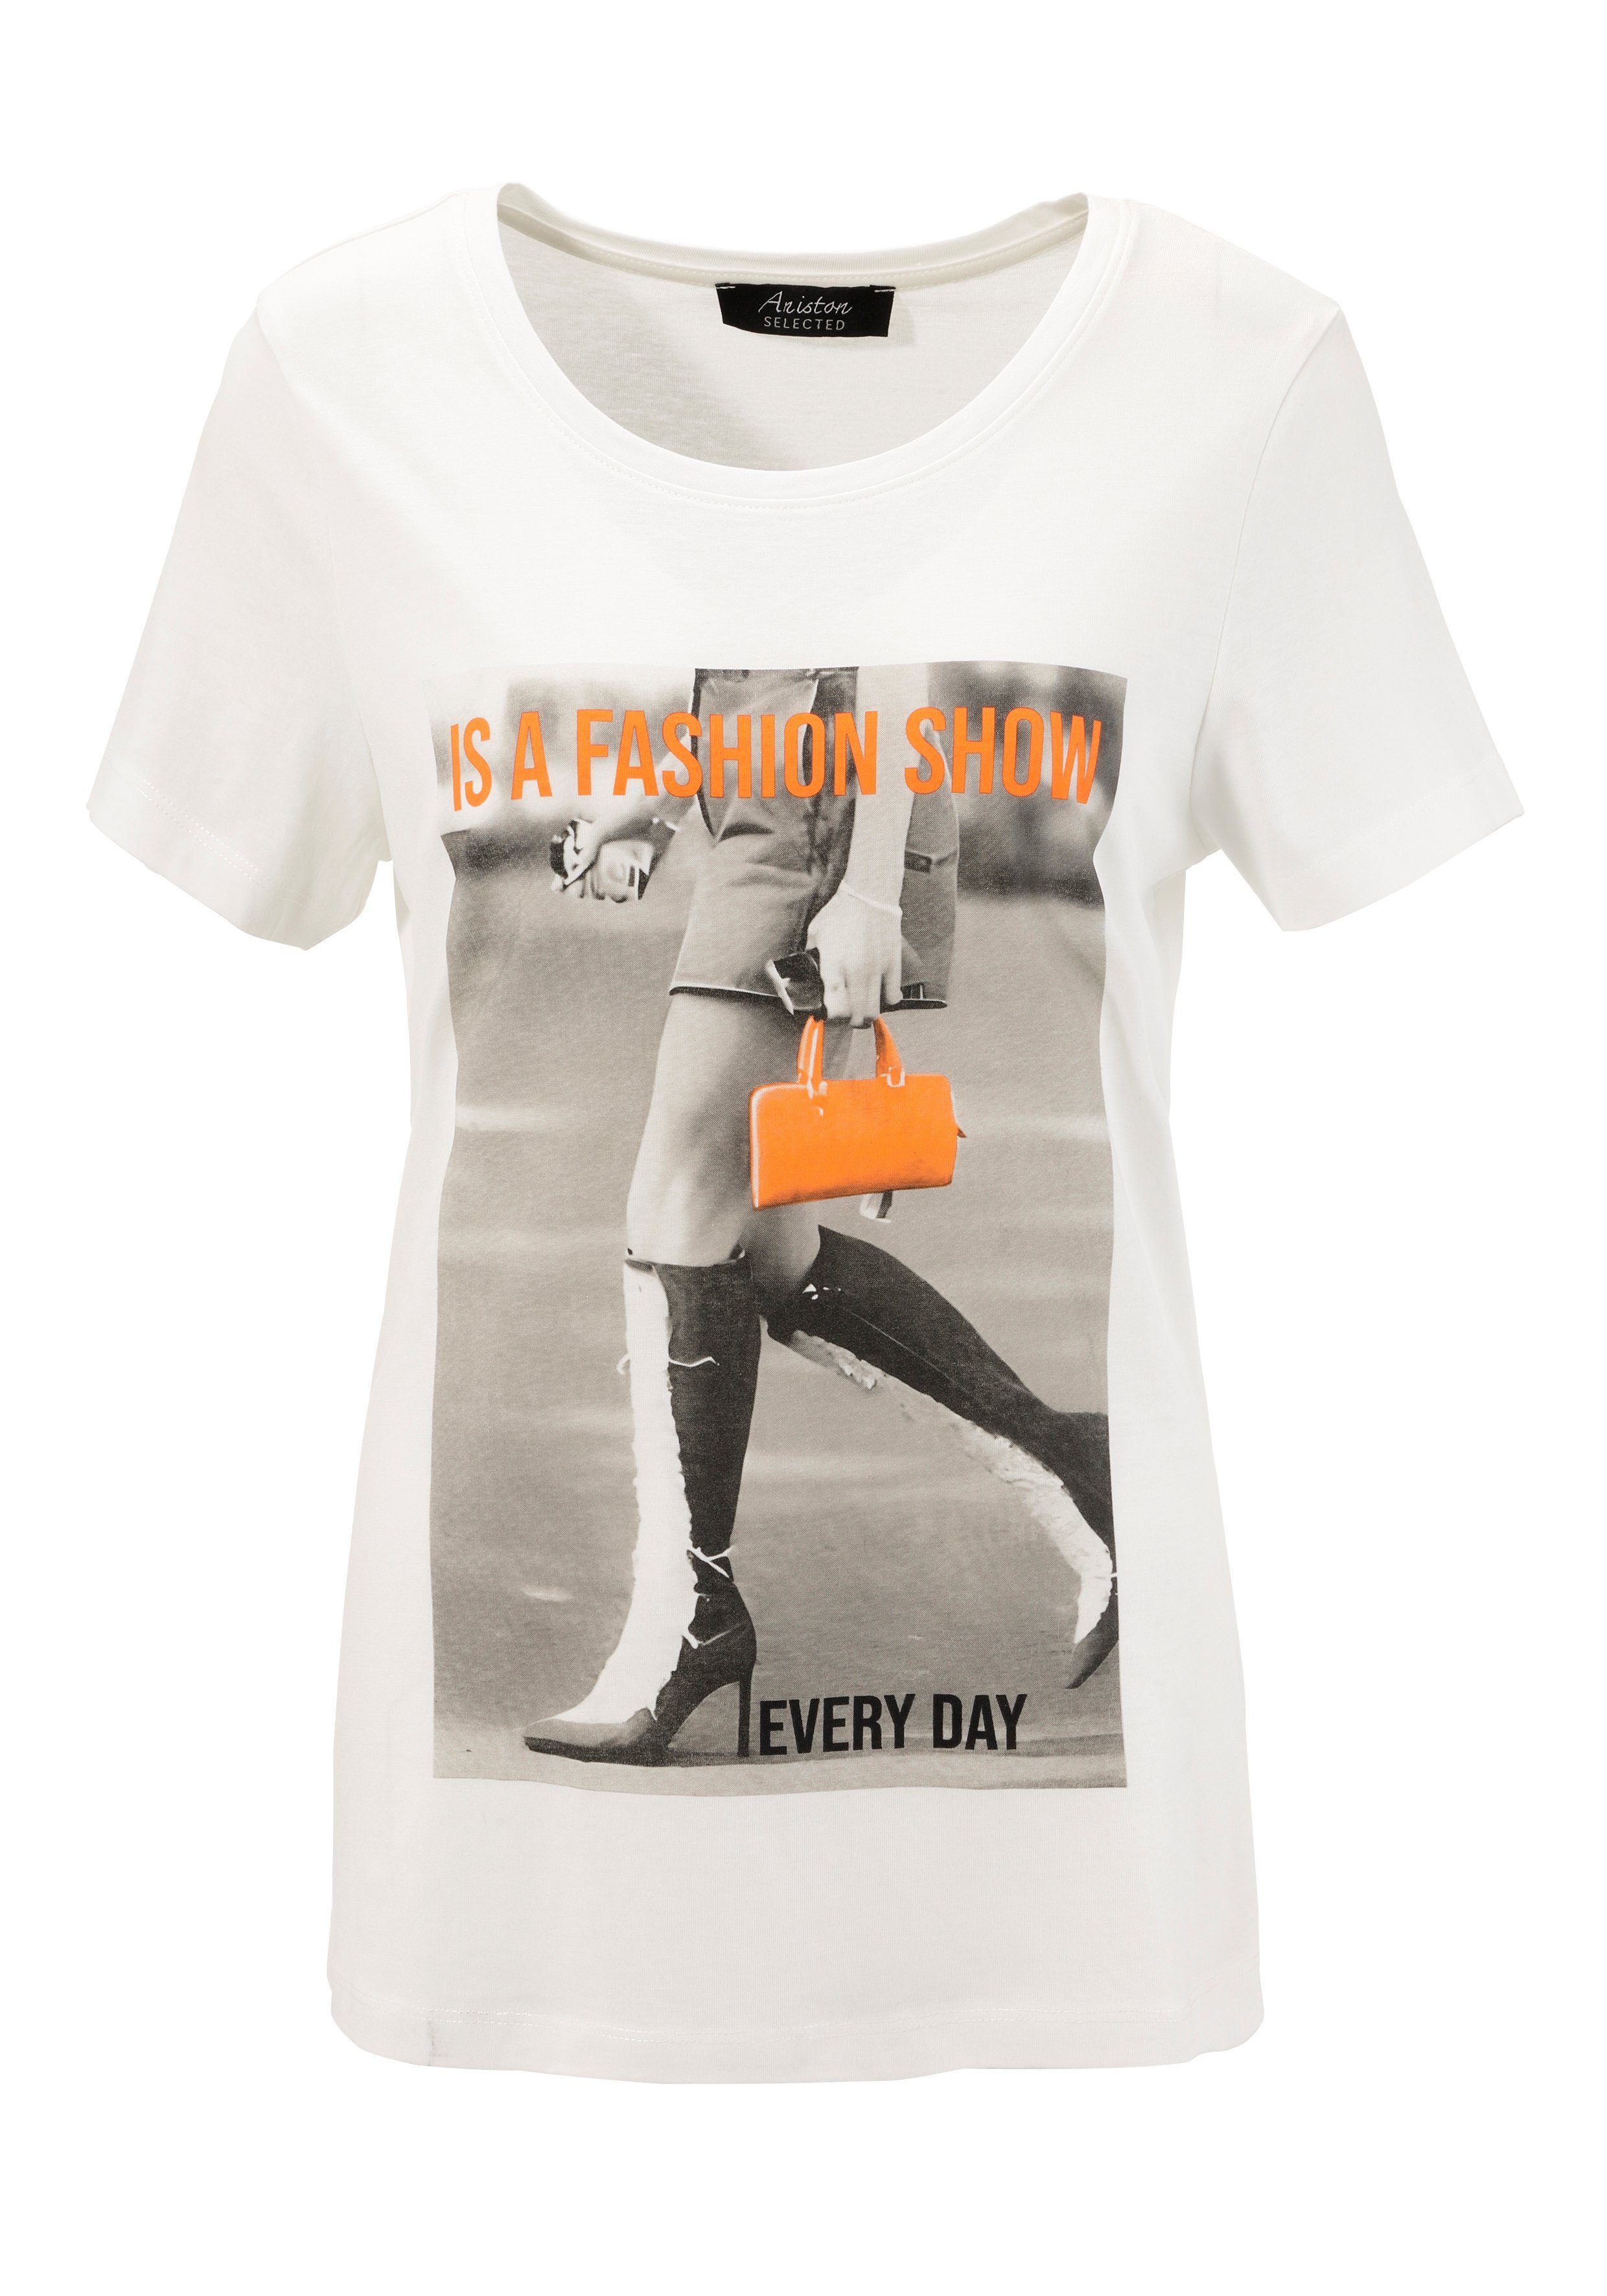 Aniston SELECTED T-shirt met modieuze print "every day is a fashion show" nieuwe collectie